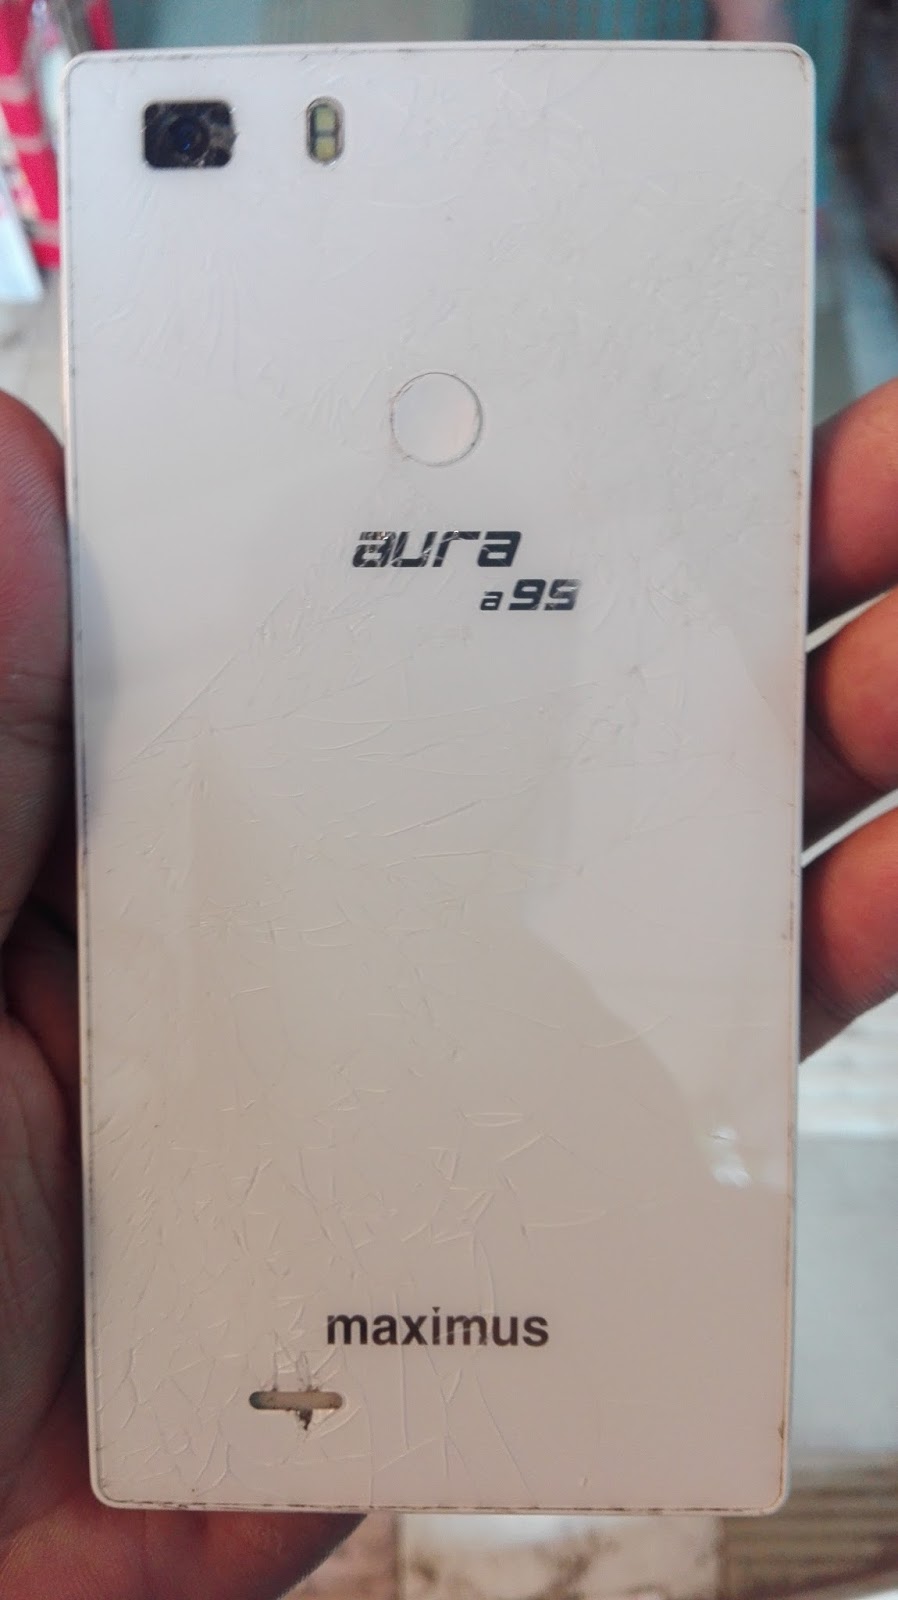 Maximus Aura A99 flash File Without Password